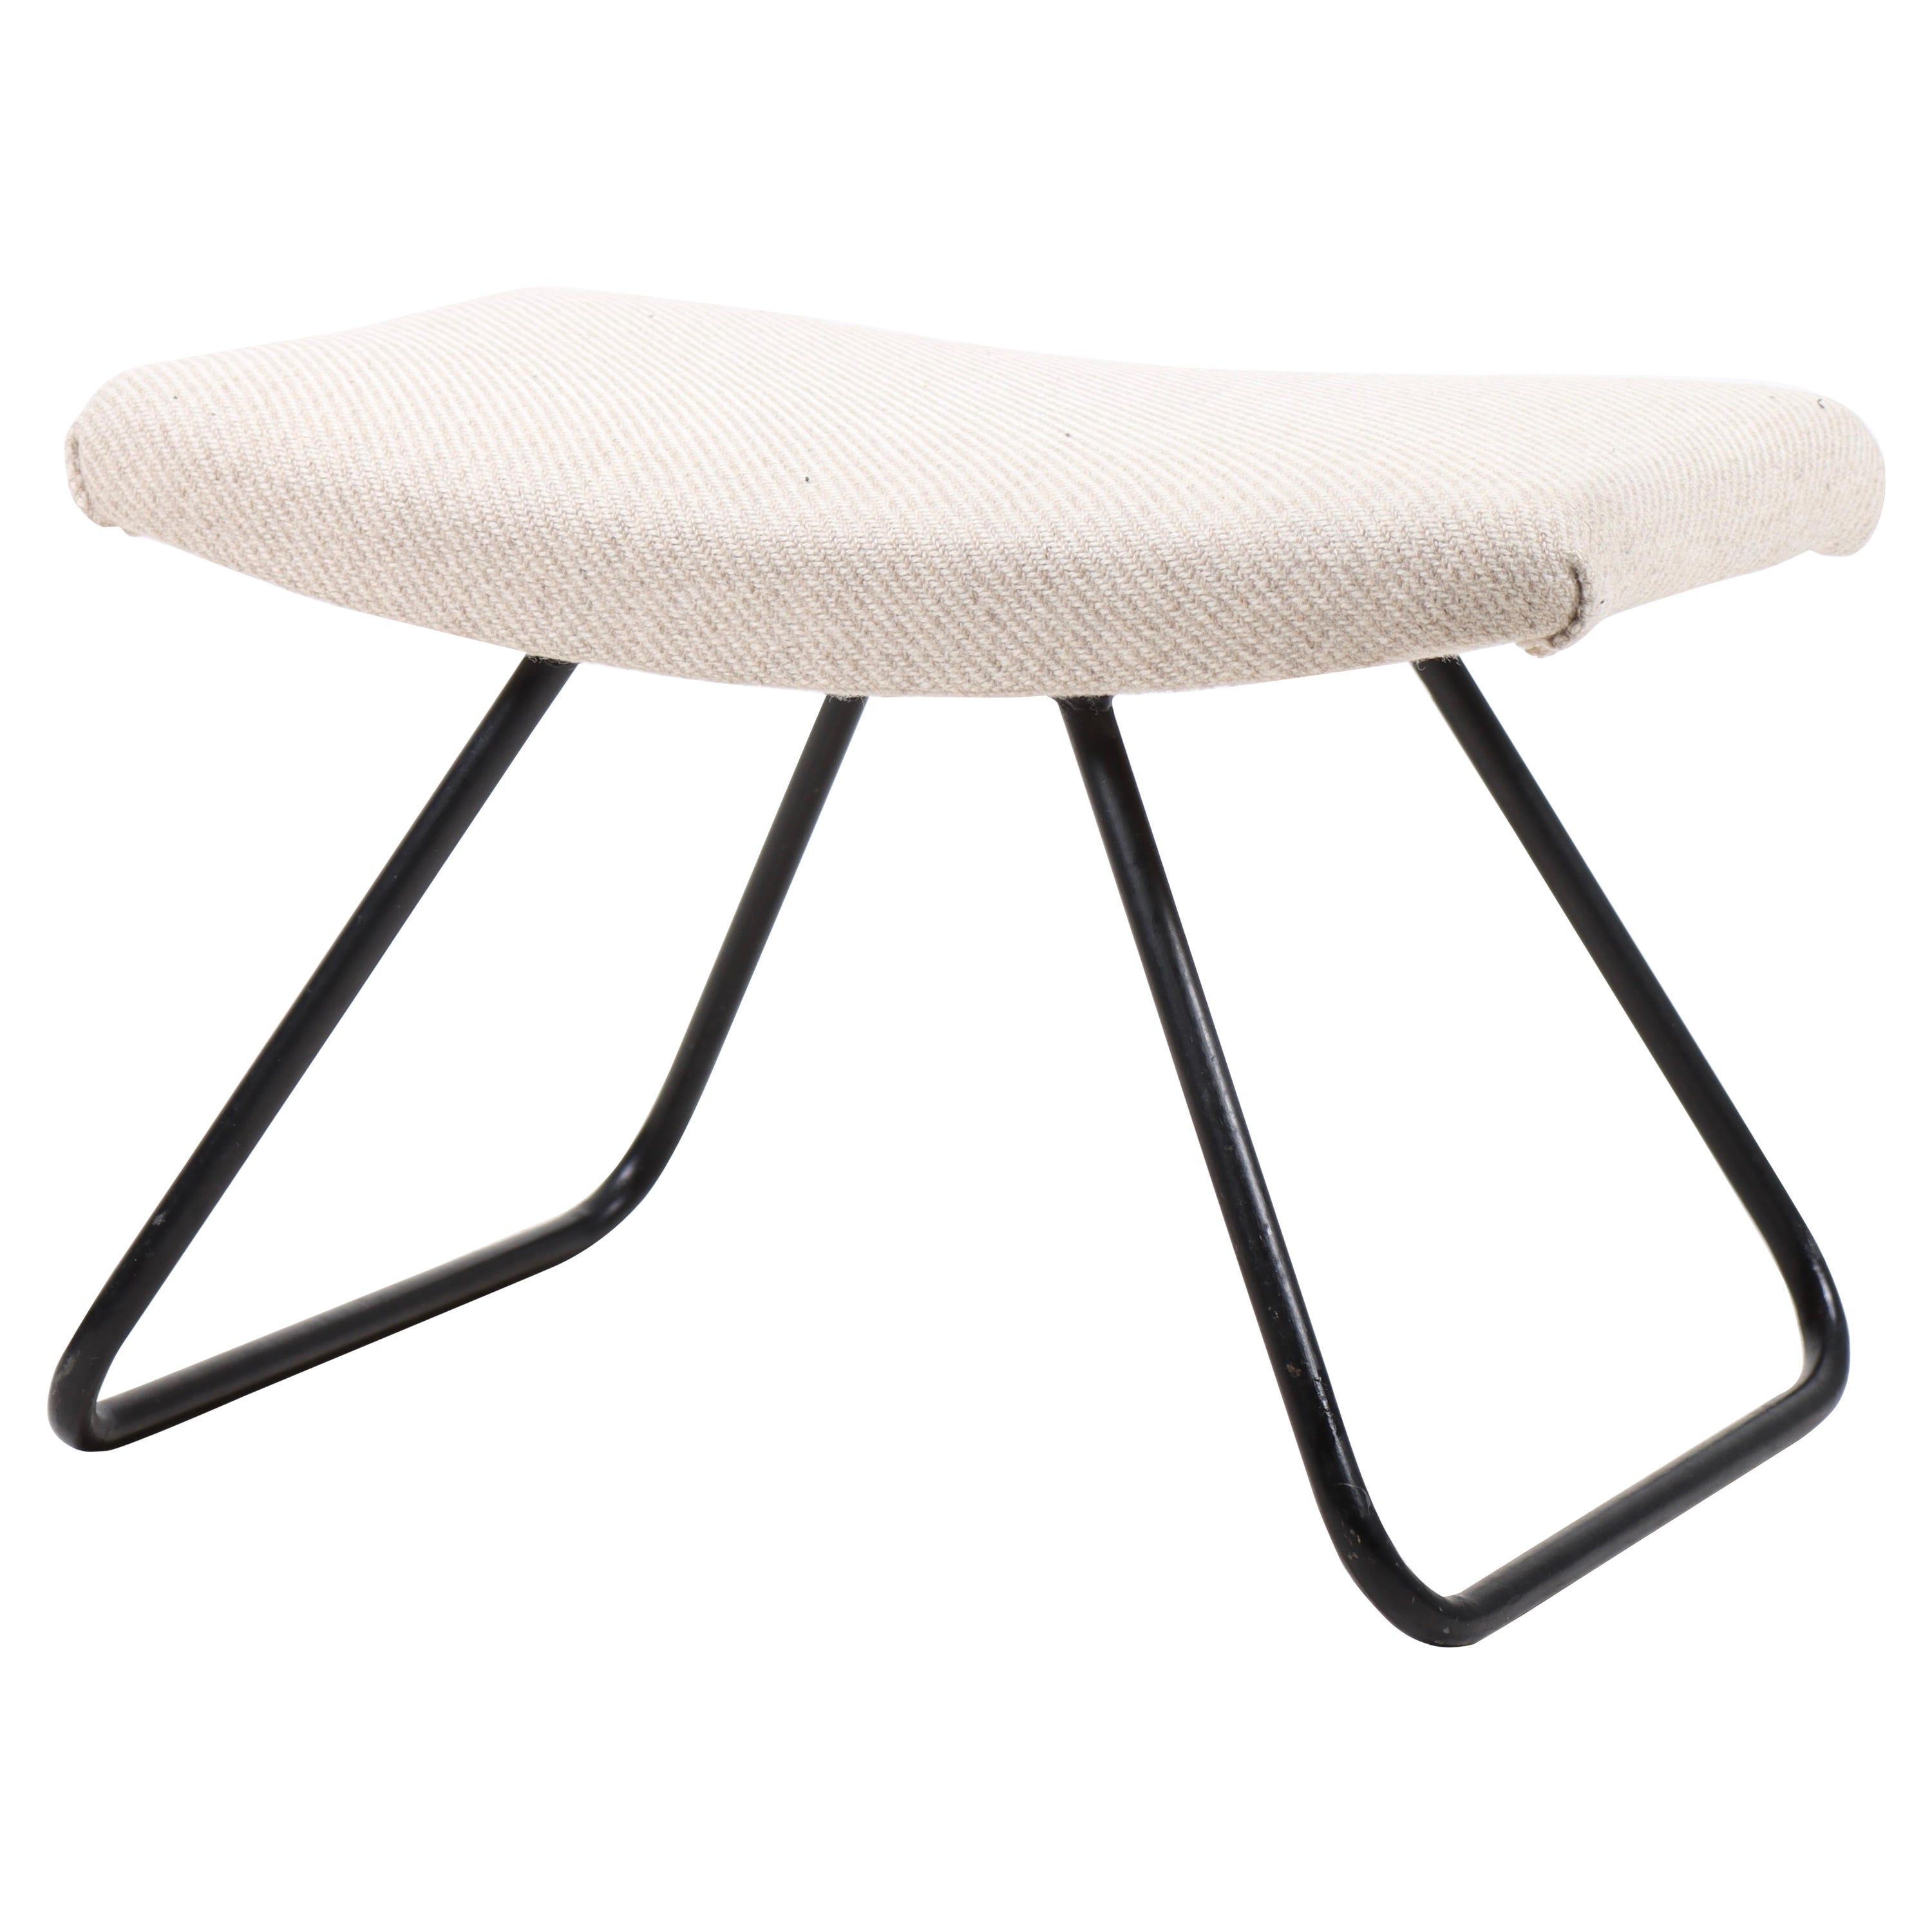 Midcentury Stool with Fabric, Made in Denmark 1960s For Sale